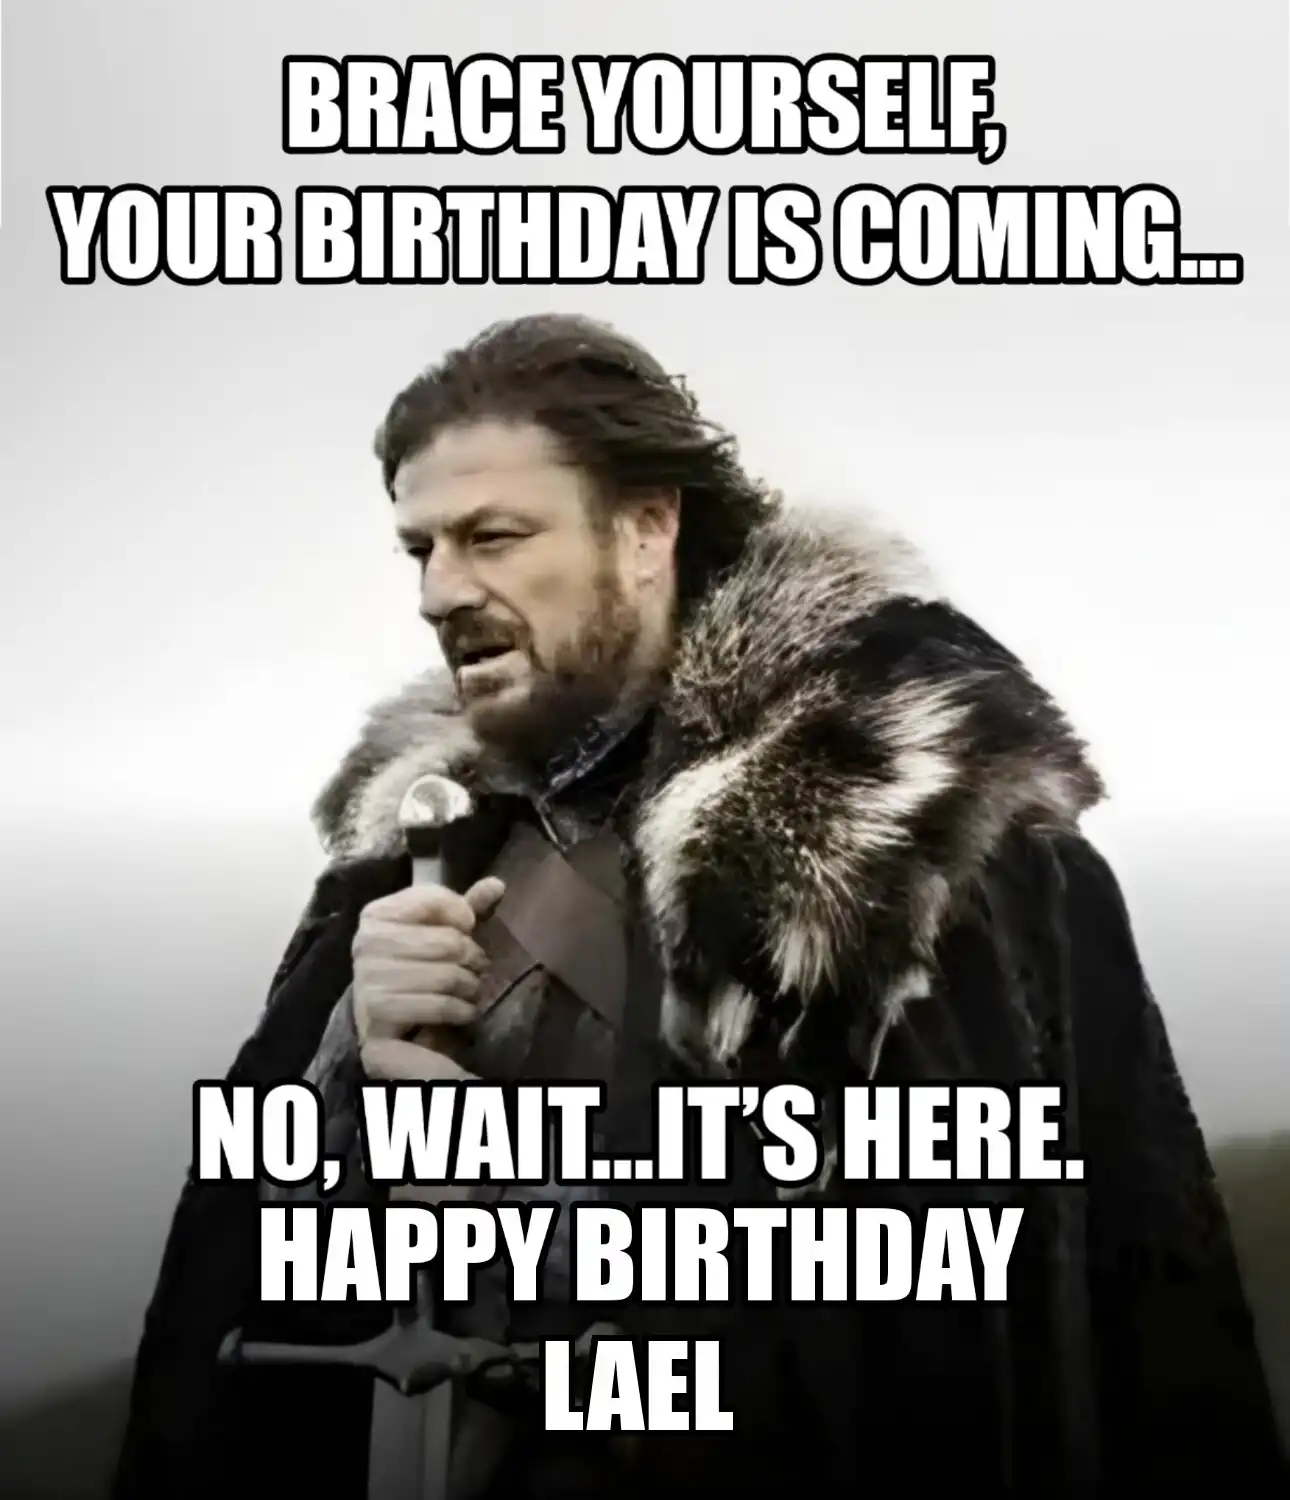 Happy Birthday Lael Brace Yourself Your Birthday Is Coming Meme